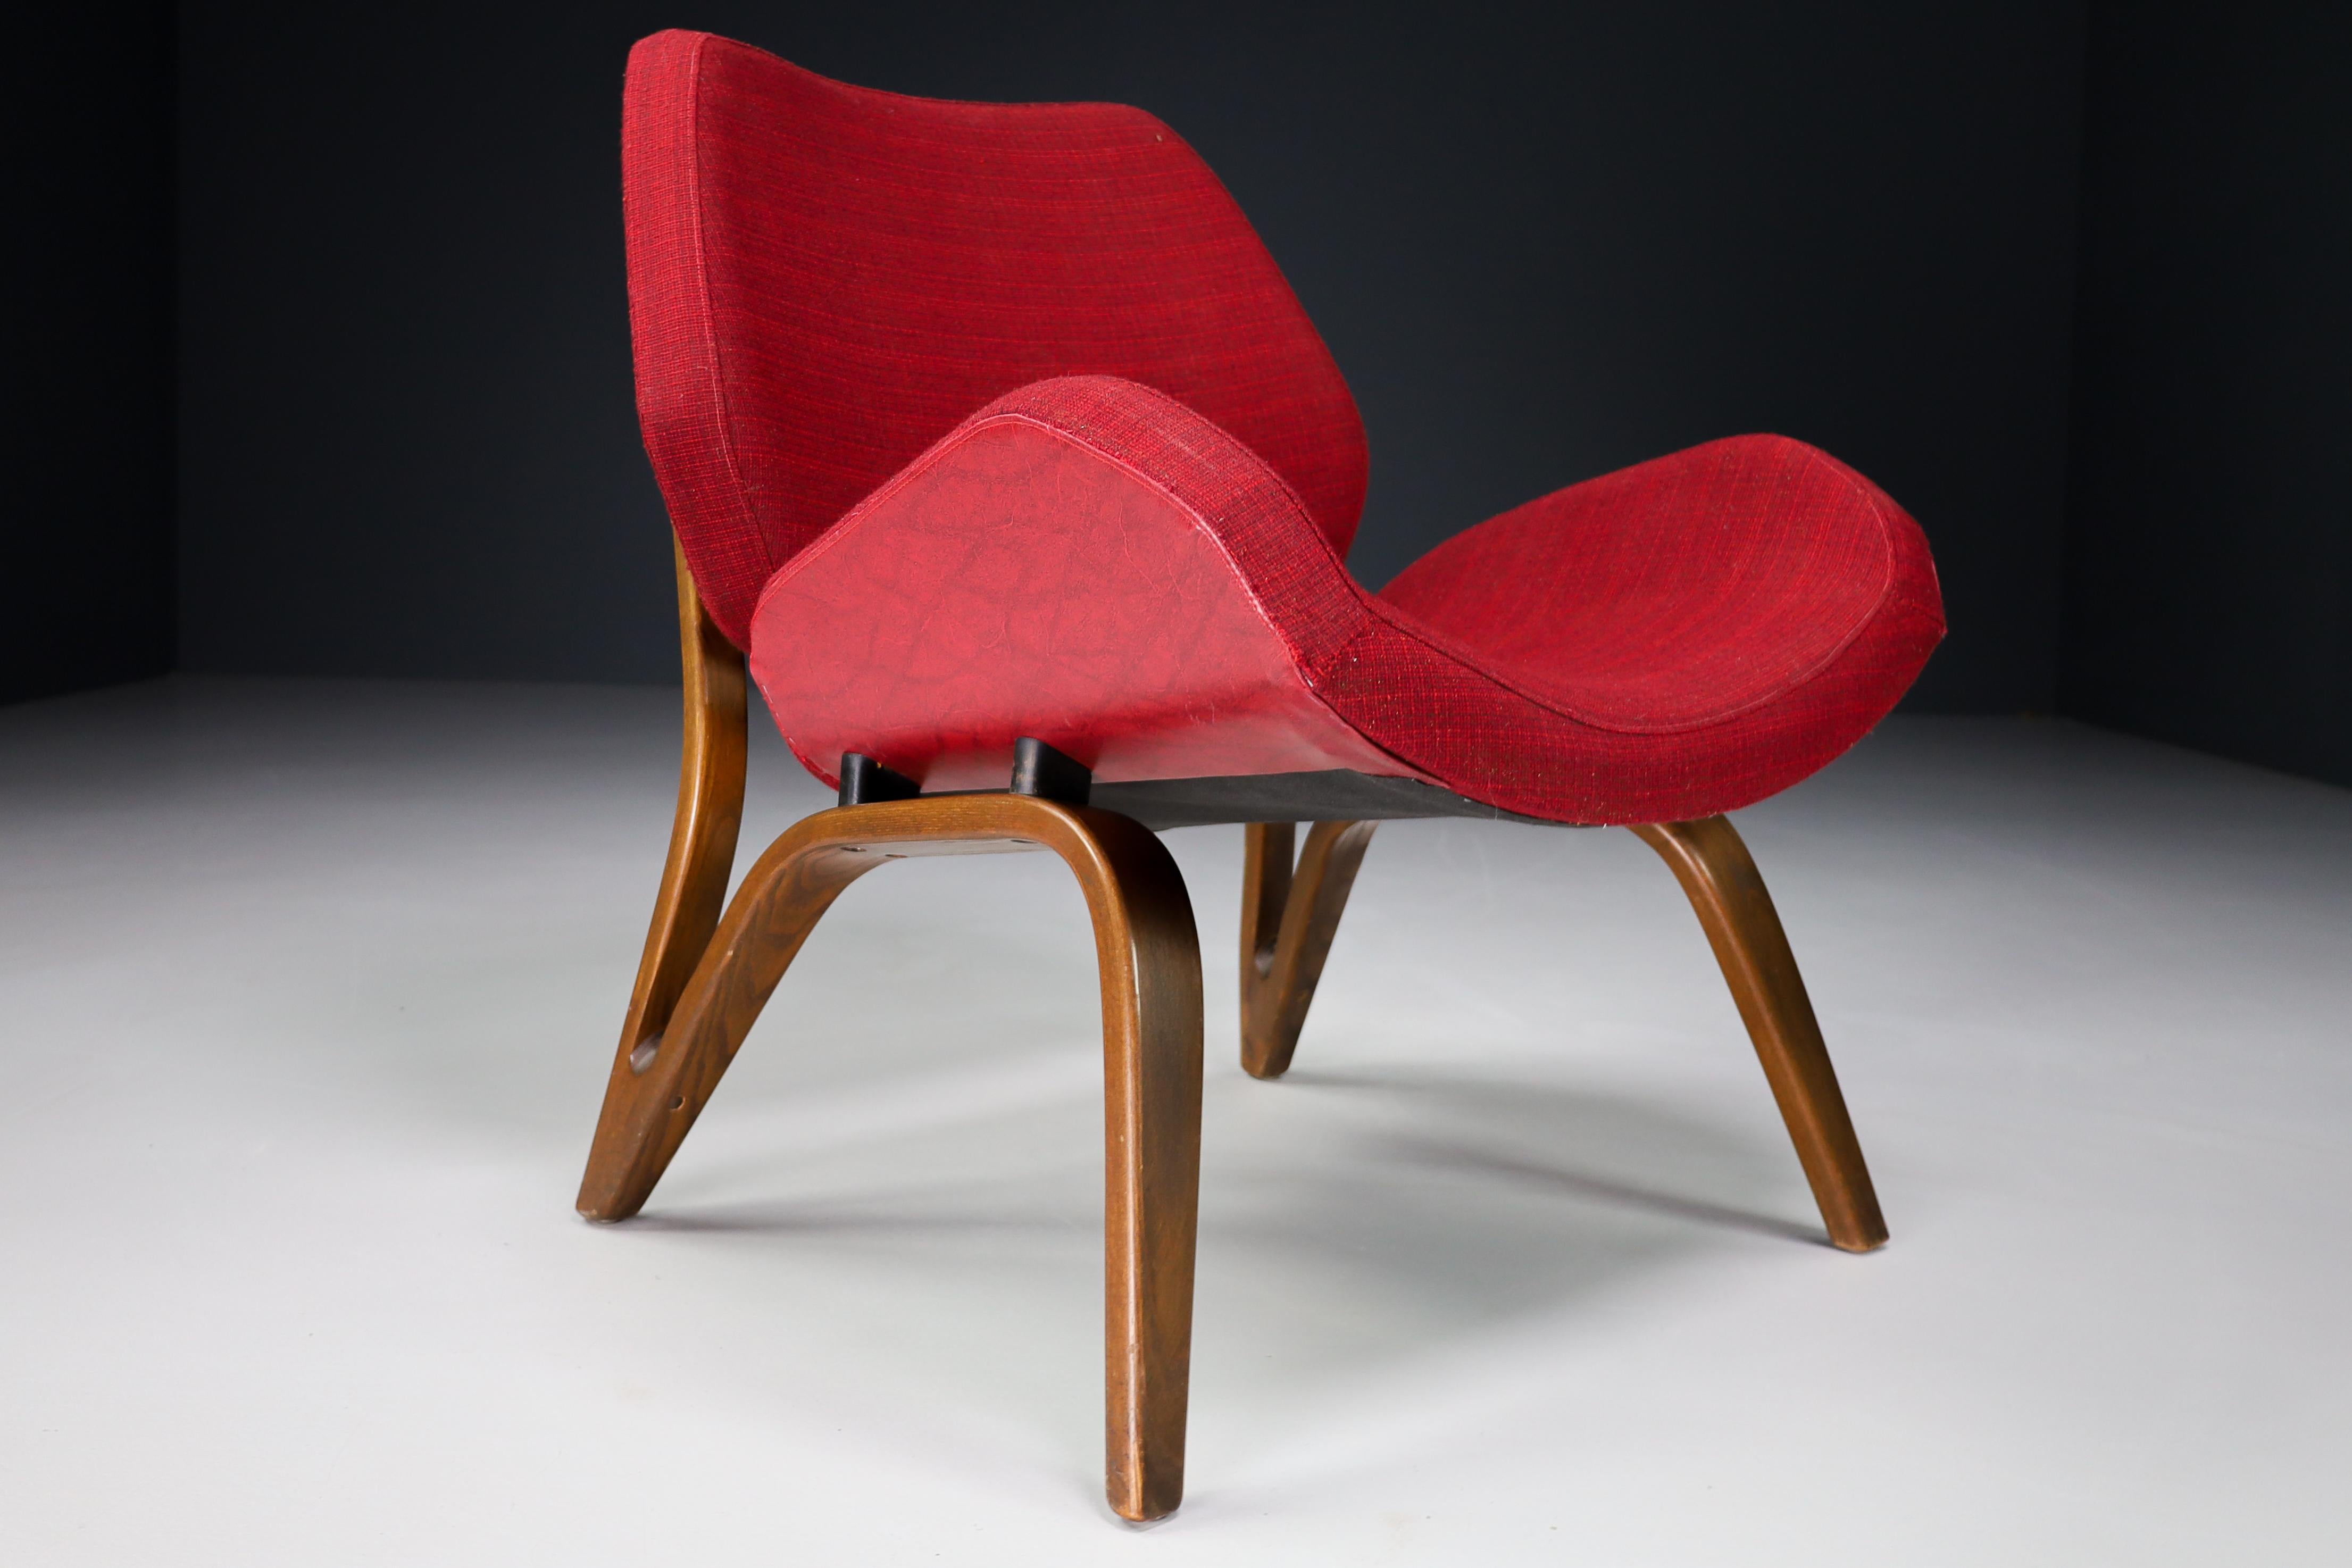 Lounge chair by Paul Bode for Deutsche Federholzgesellschaft, Germany 1954
Rare original lounge chair in original fabric made by Deutsche Federholz-Gesellschaft, Kassel. Laminated ash wood, stained dark, laminated wood, laminated dark red, dark red